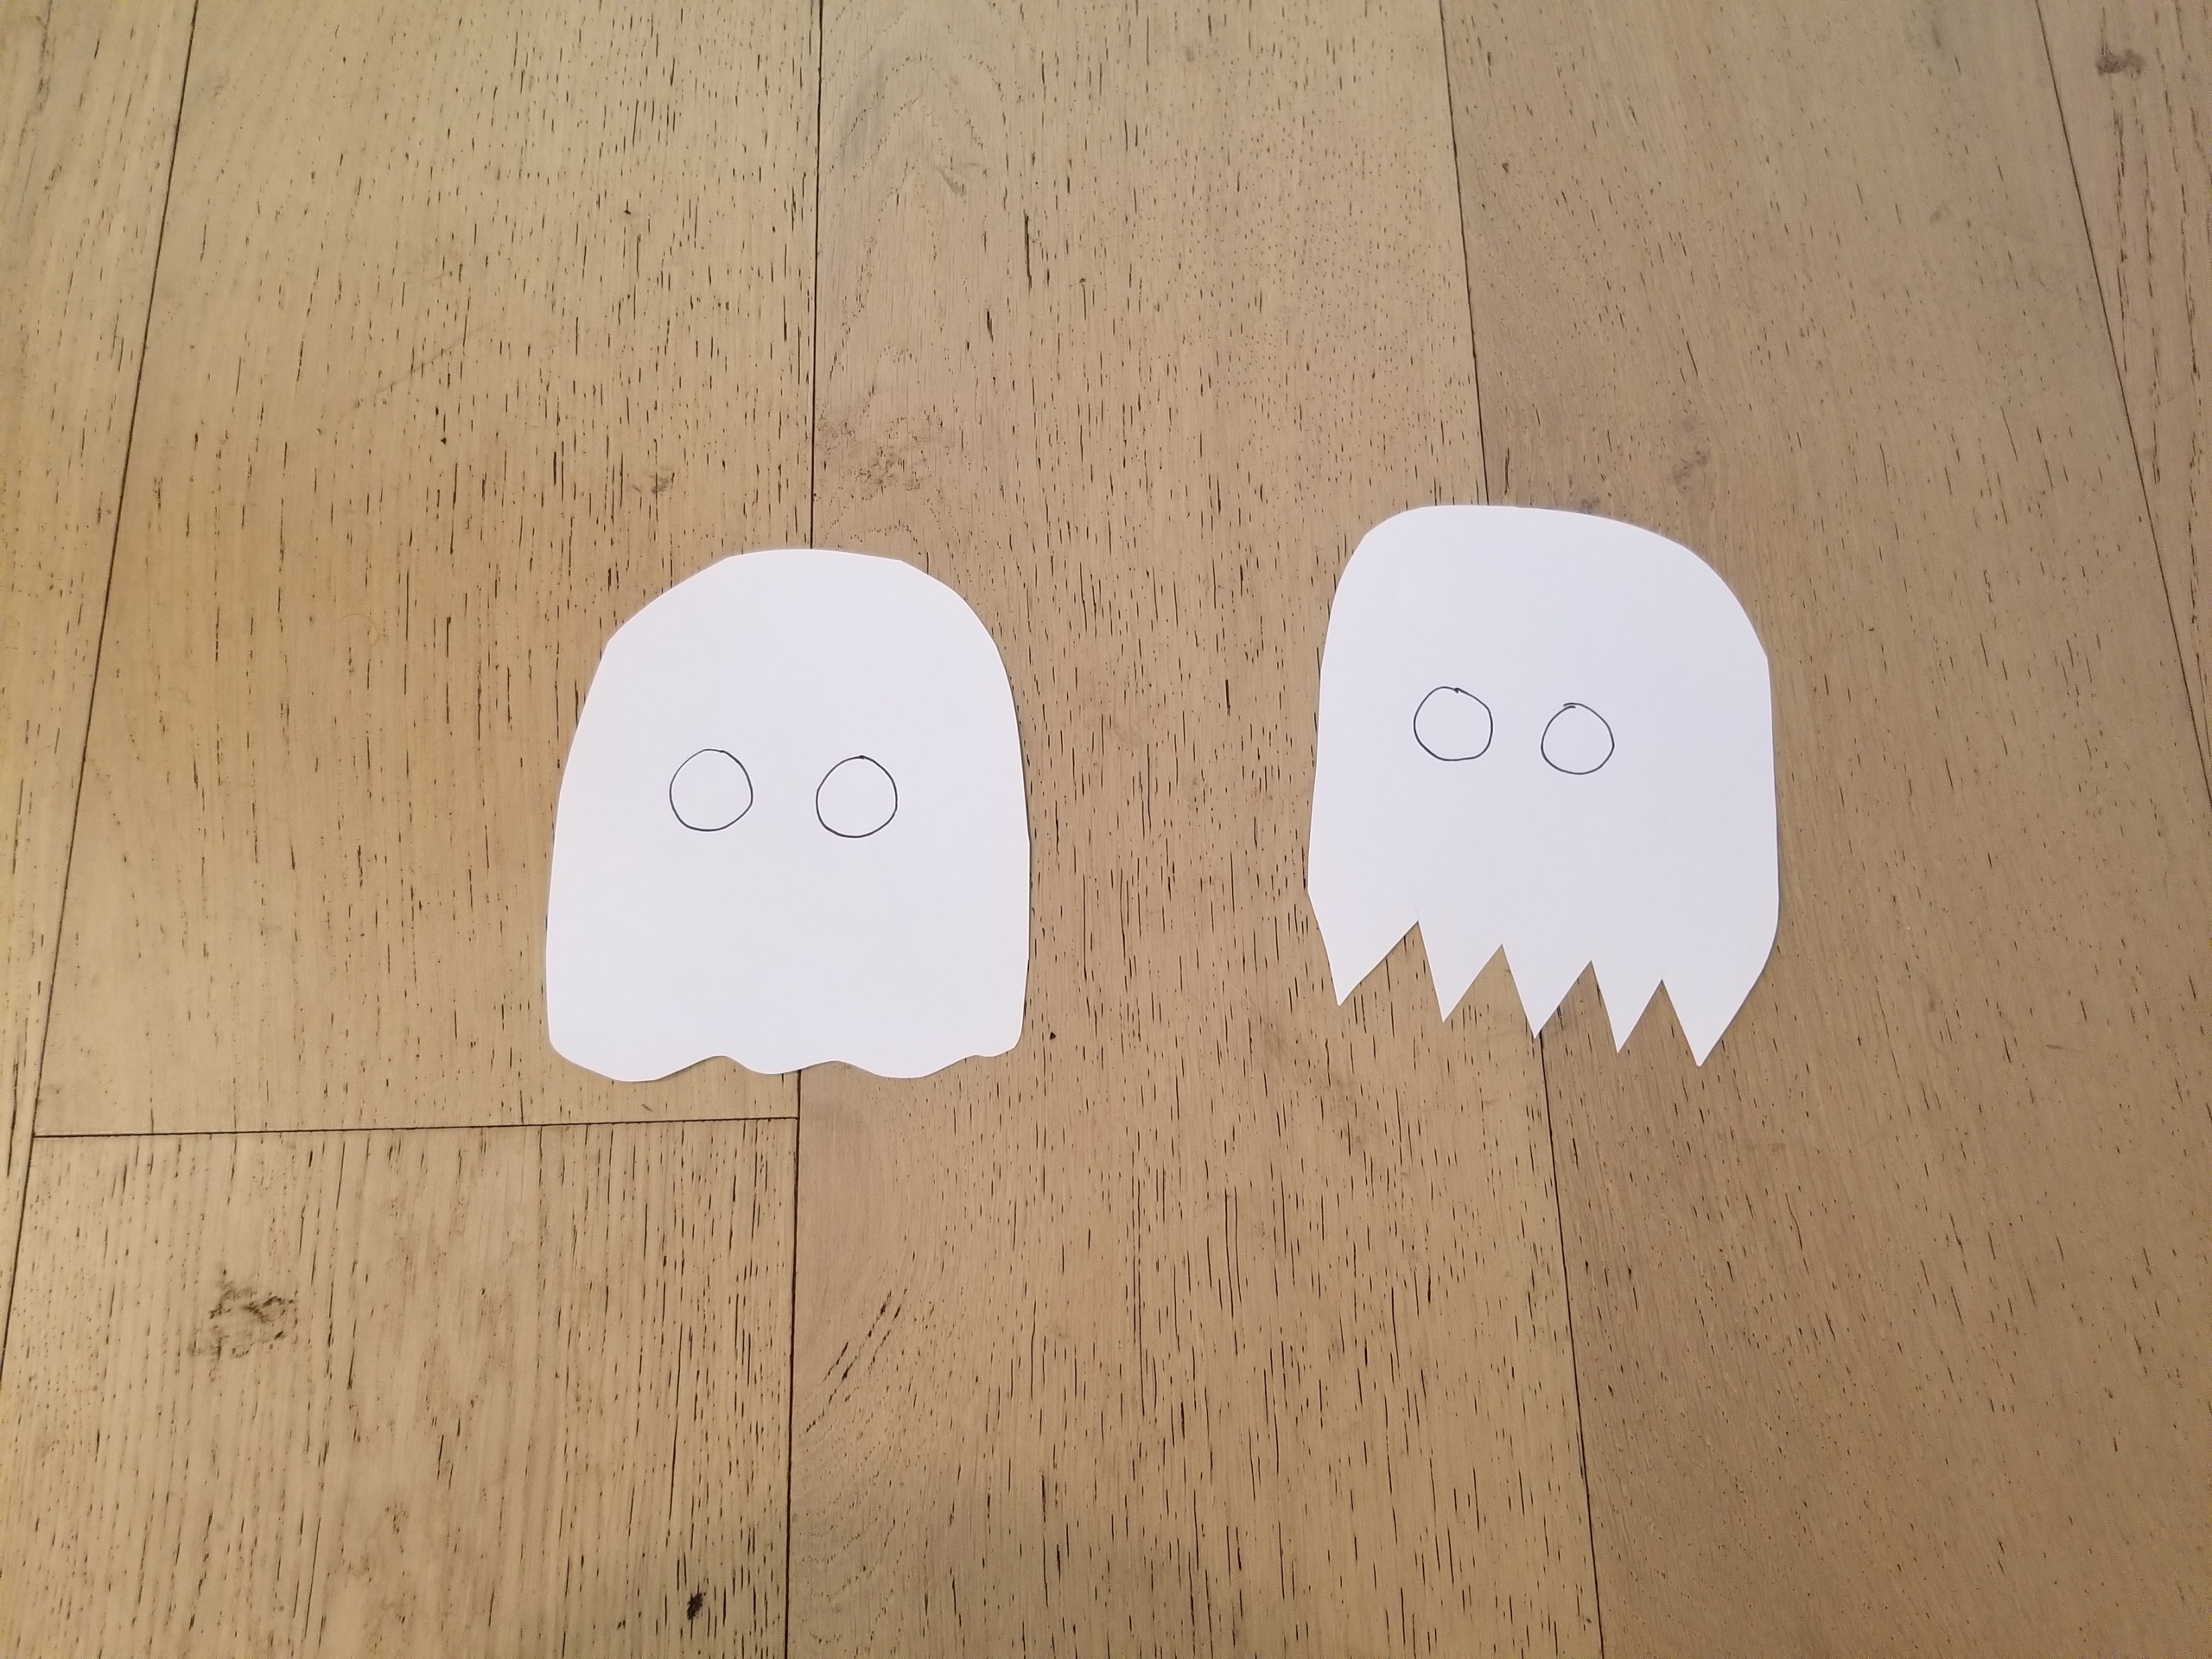 Paper ghosts with 'OO' drawn in the middle of each